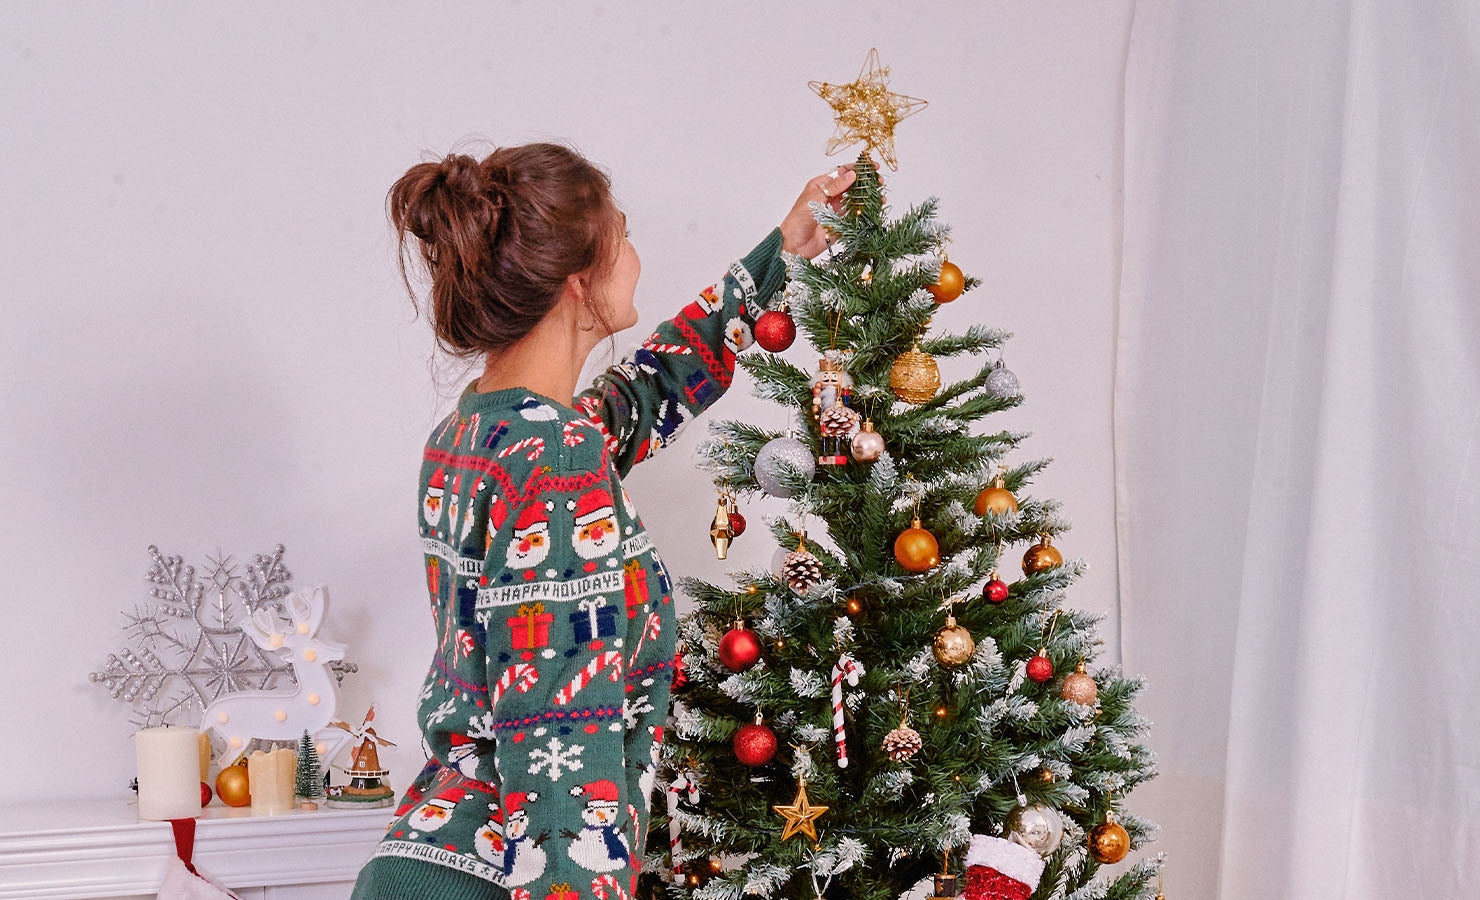 bloomthis-blog-fun-easy-christmas-decoration-ideas-01-tree-star-ornaments-girl-sweater